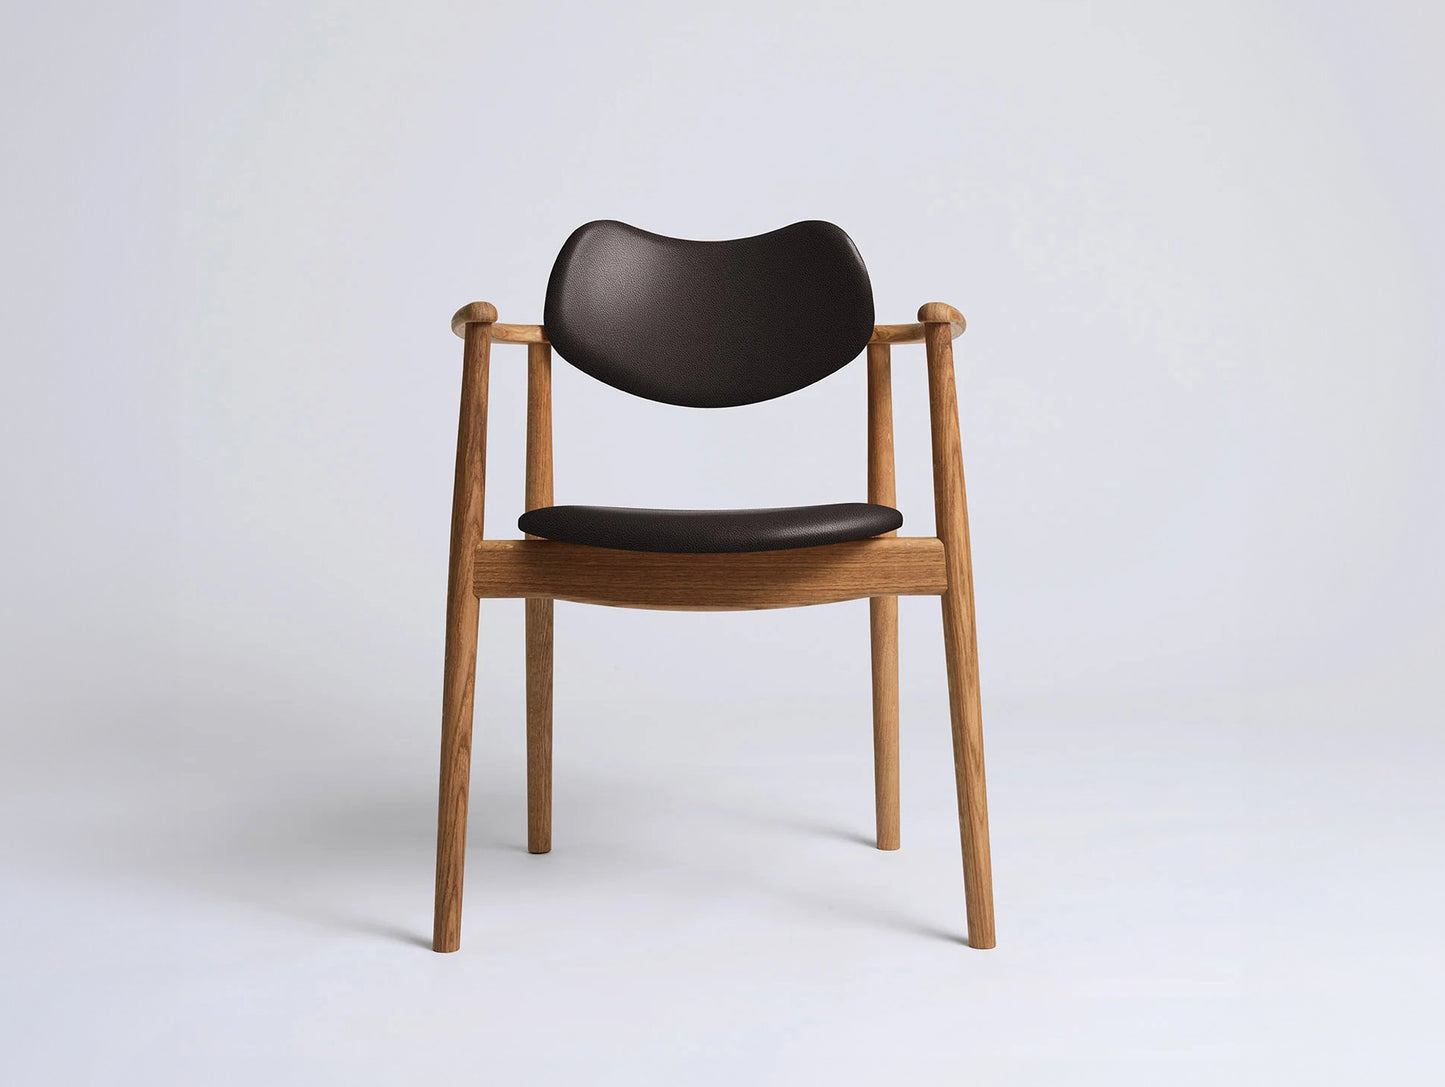 Regatta Chair Seat and Back Upholstered by Ro Collection - Oiled Oak / Standard Sierra Dark Brown Leather